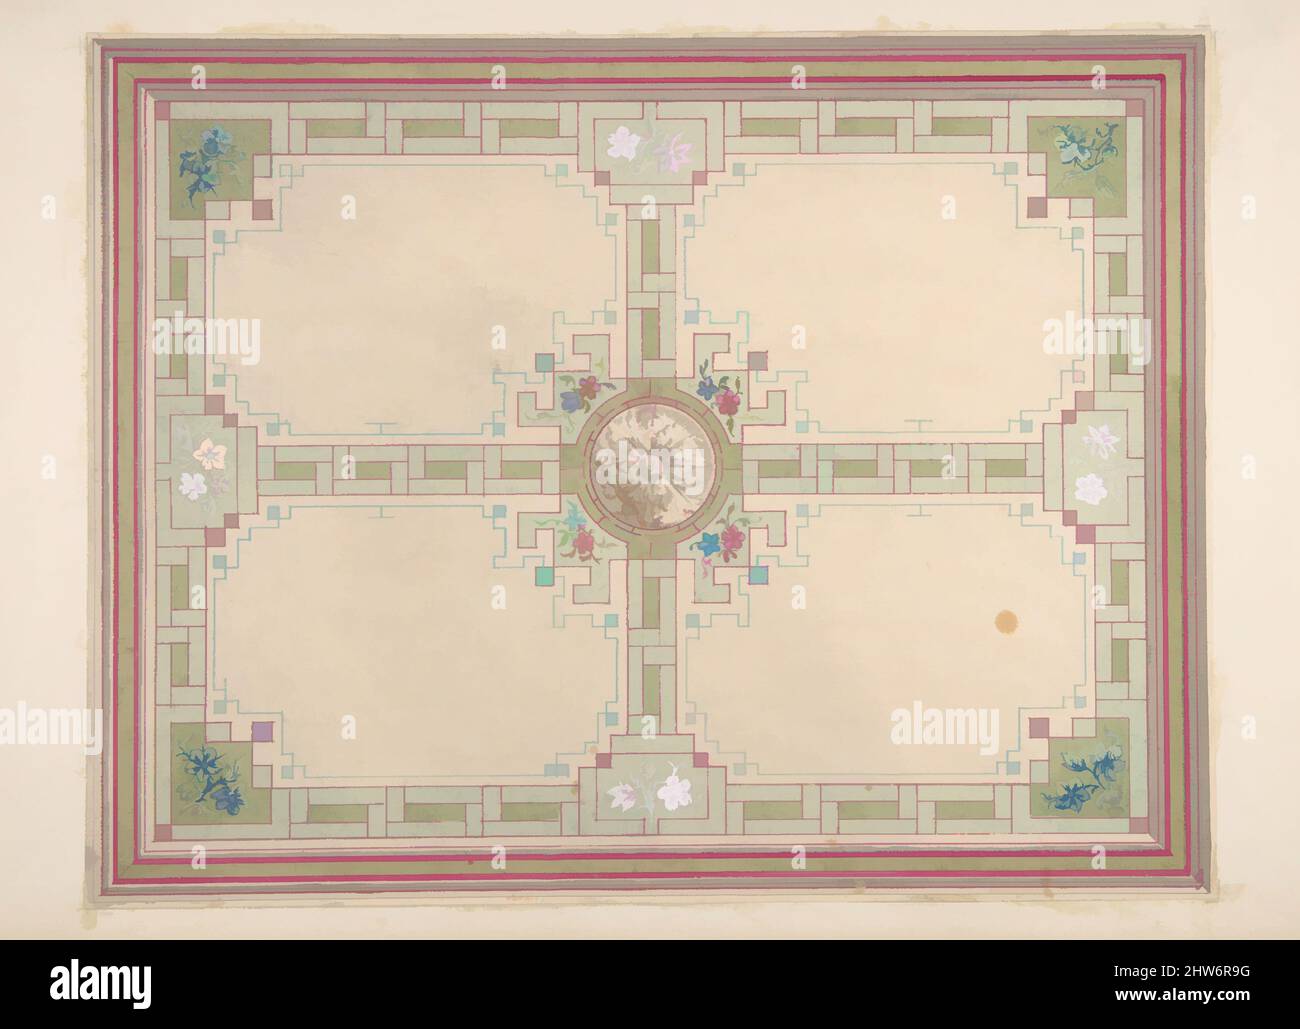 Art inspired by Design for a ceiling with floral accents and Greek key border, second half 19th century, Graphite, gouache, adn watercolor, Overall: 10 11/16 x 14 7/8 in. (27.1 x 37.8 cm), Drawings, Jules-Edmond-Charles Lachaise (French, died 1897), Eugène-Pierre Gourdet (French, born, Classic works modernized by Artotop with a splash of modernity. Shapes, color and value, eye-catching visual impact on art. Emotions through freedom of artworks in a contemporary way. A timeless message pursuing a wildly creative new direction. Artists turning to the digital medium and creating the Artotop NFT Stock Photo